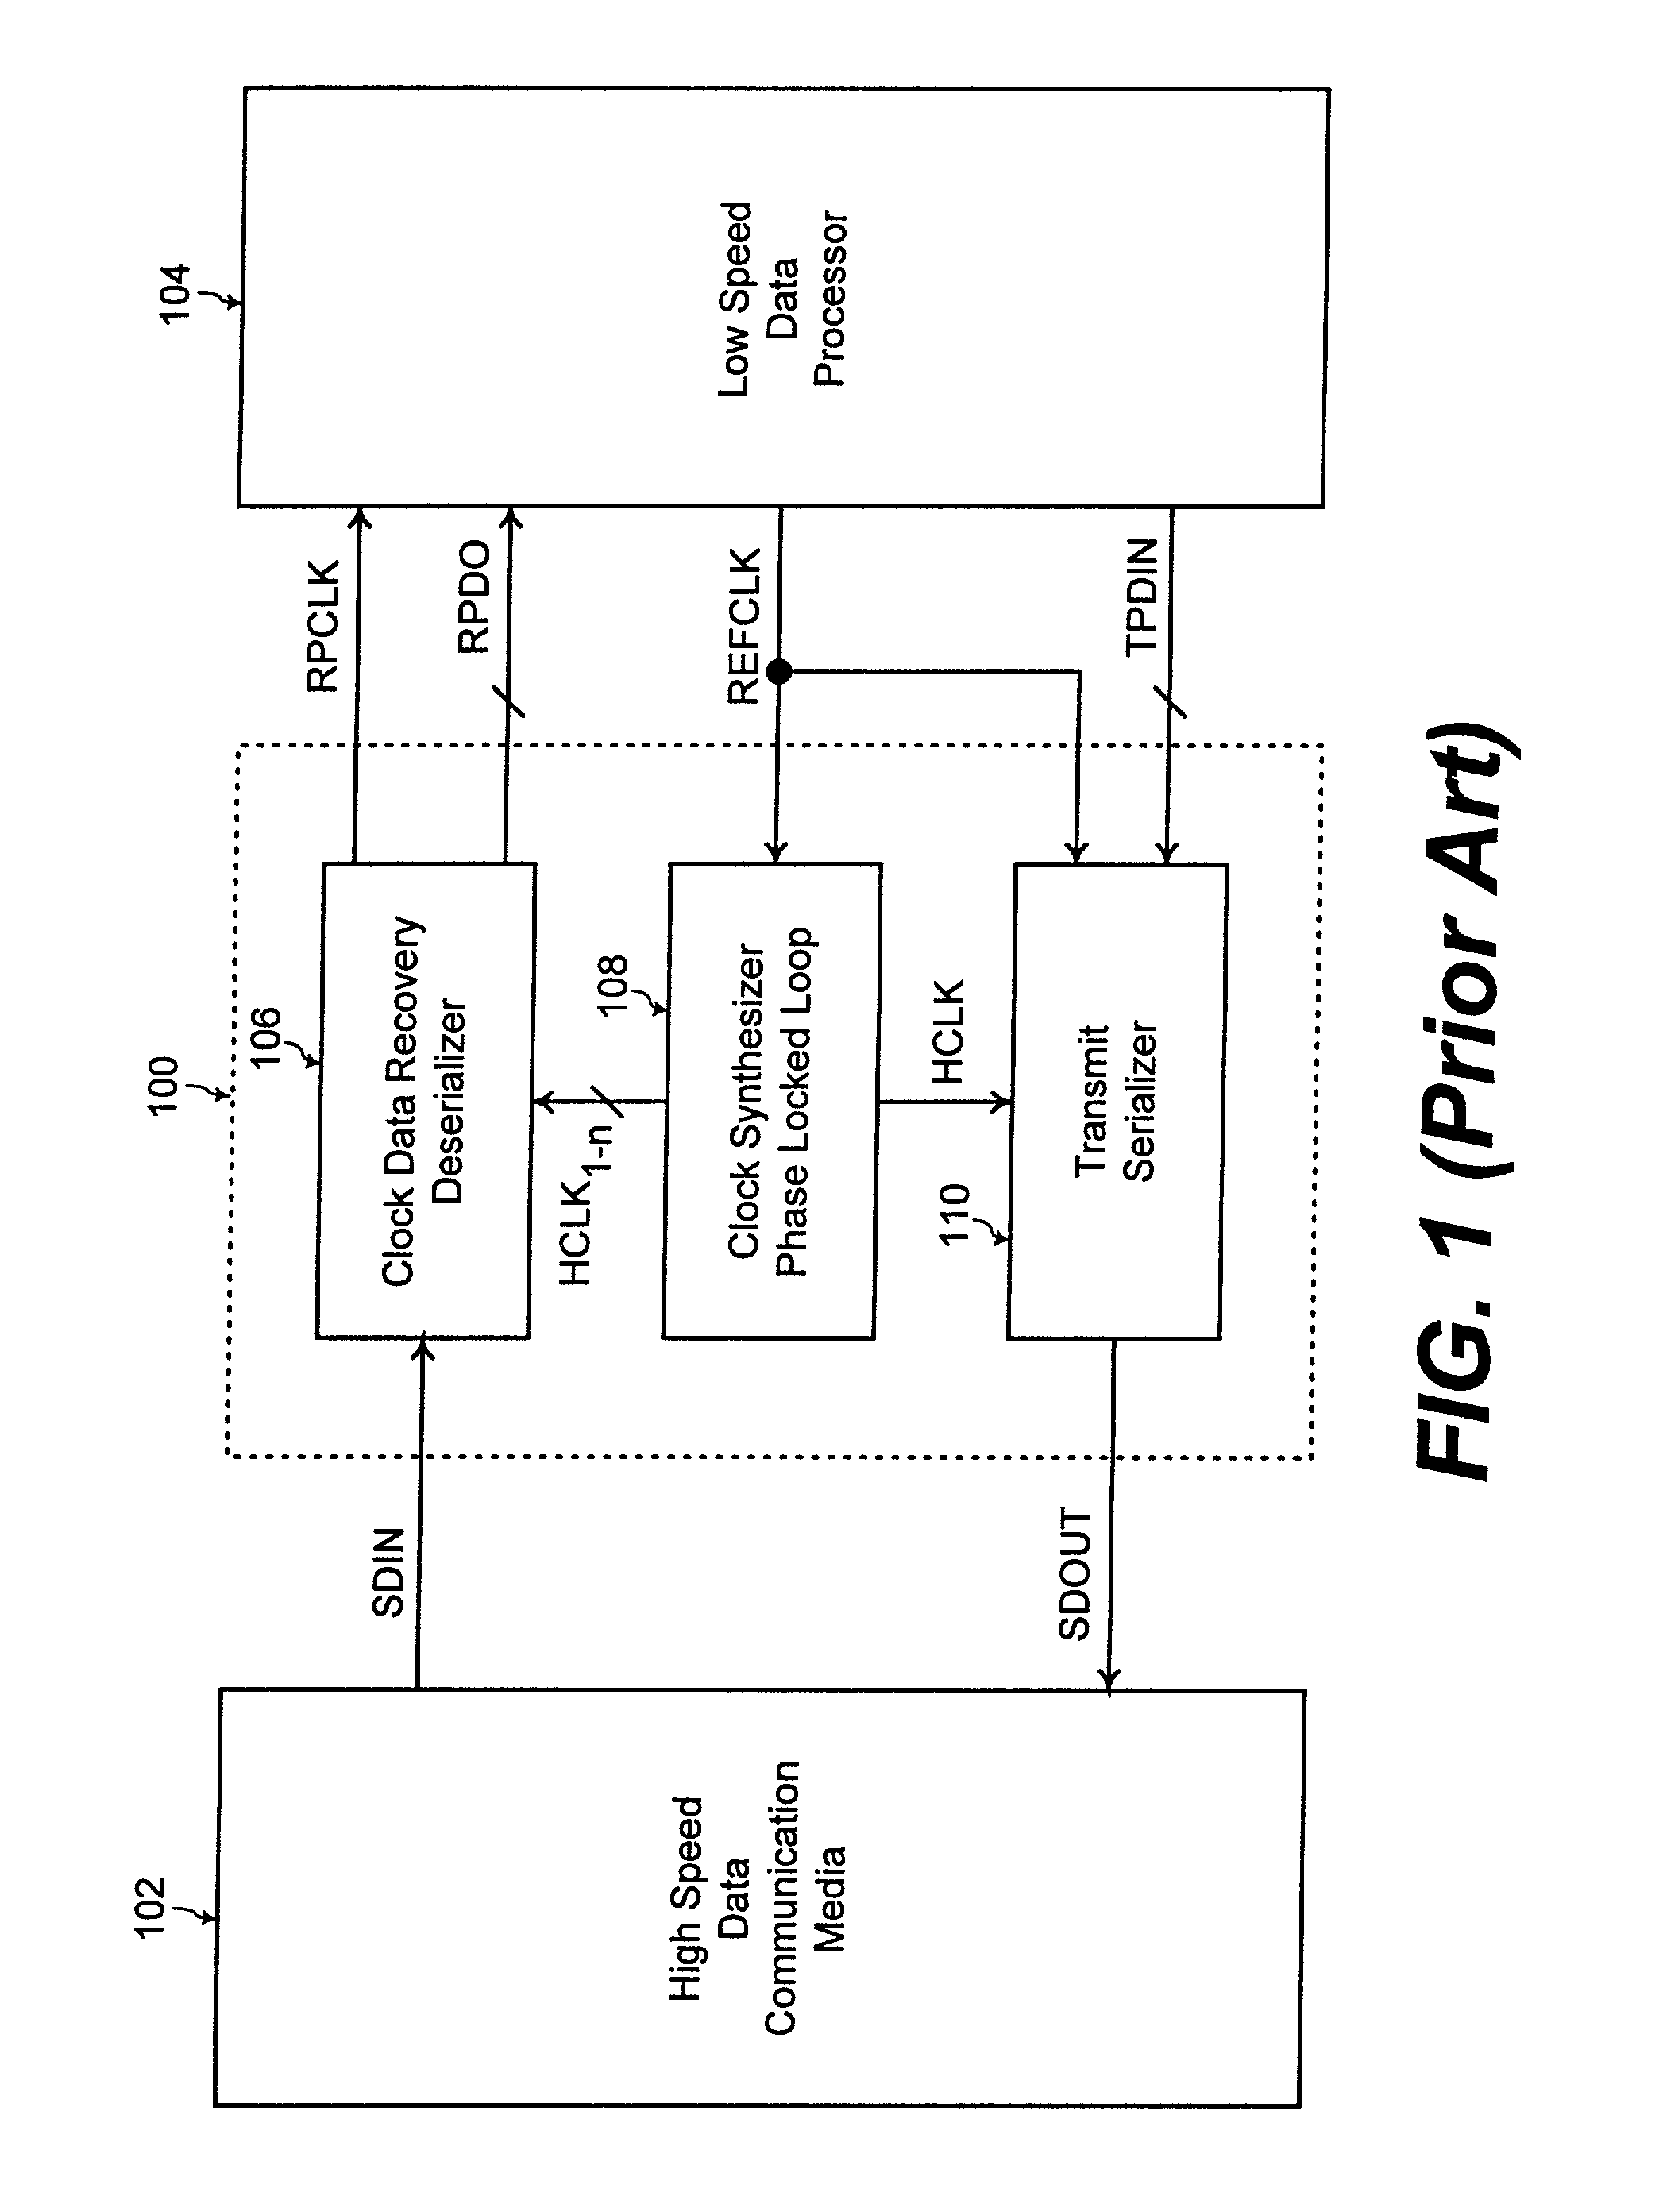 Digital phase locked loop with phase selector having minimized number of phase interpolators